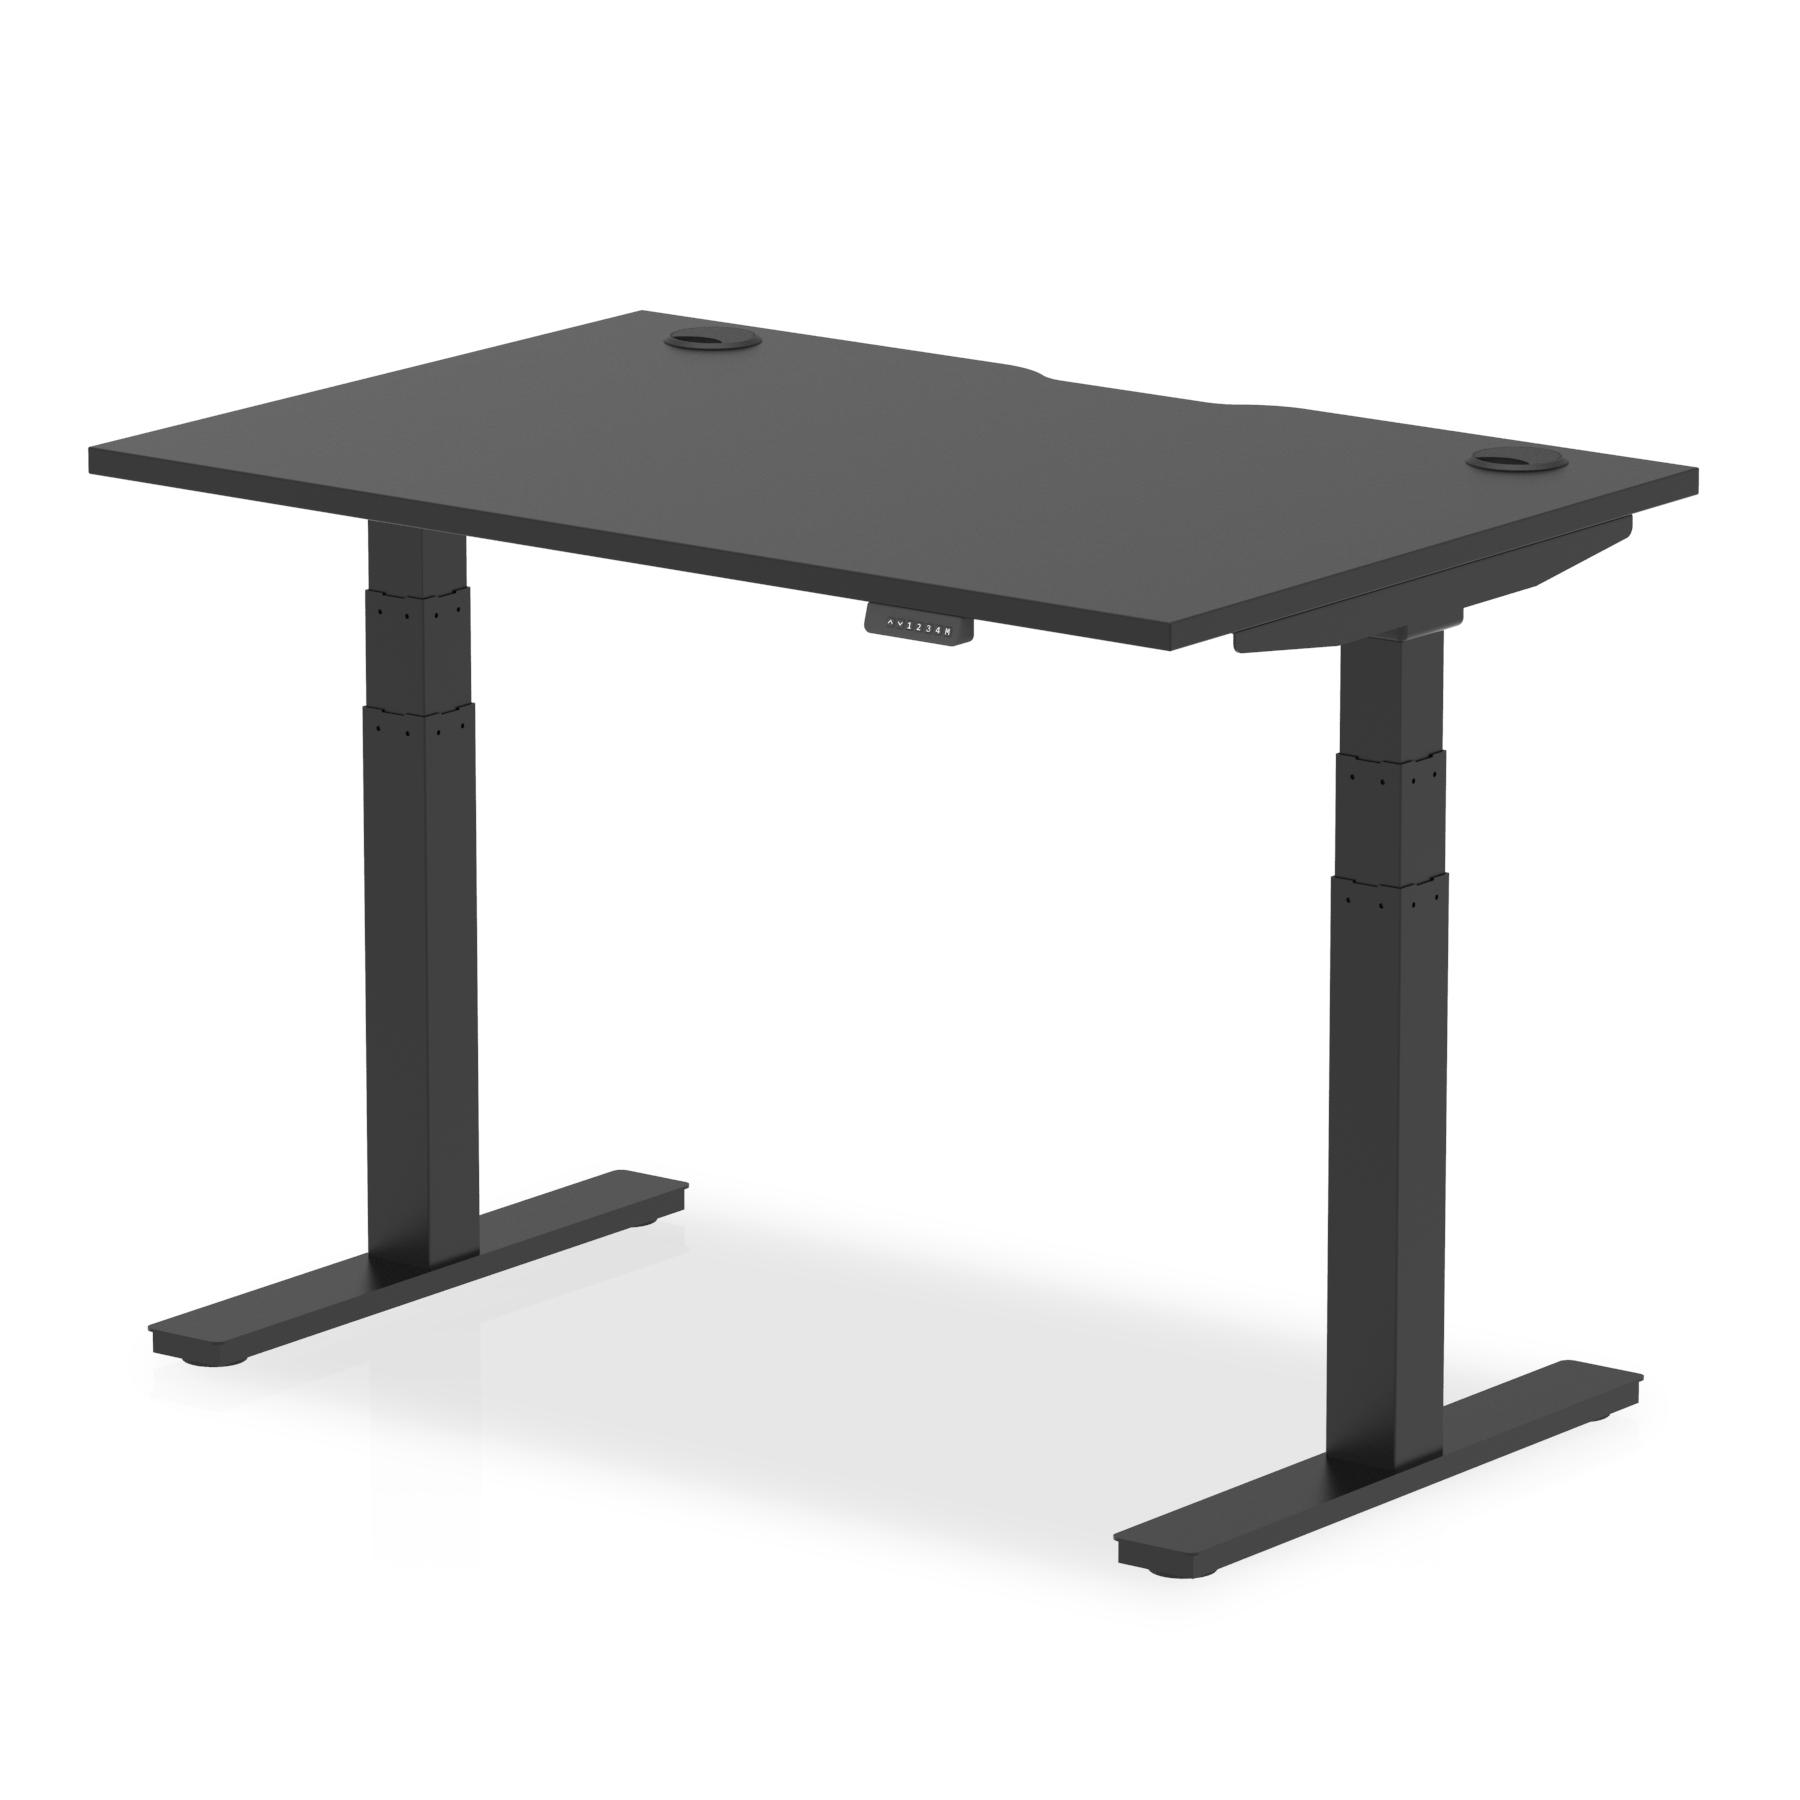 Air Black Series 1200 x 800mm Height Adjustable Desk Black Top with Cable Ports Black Leg